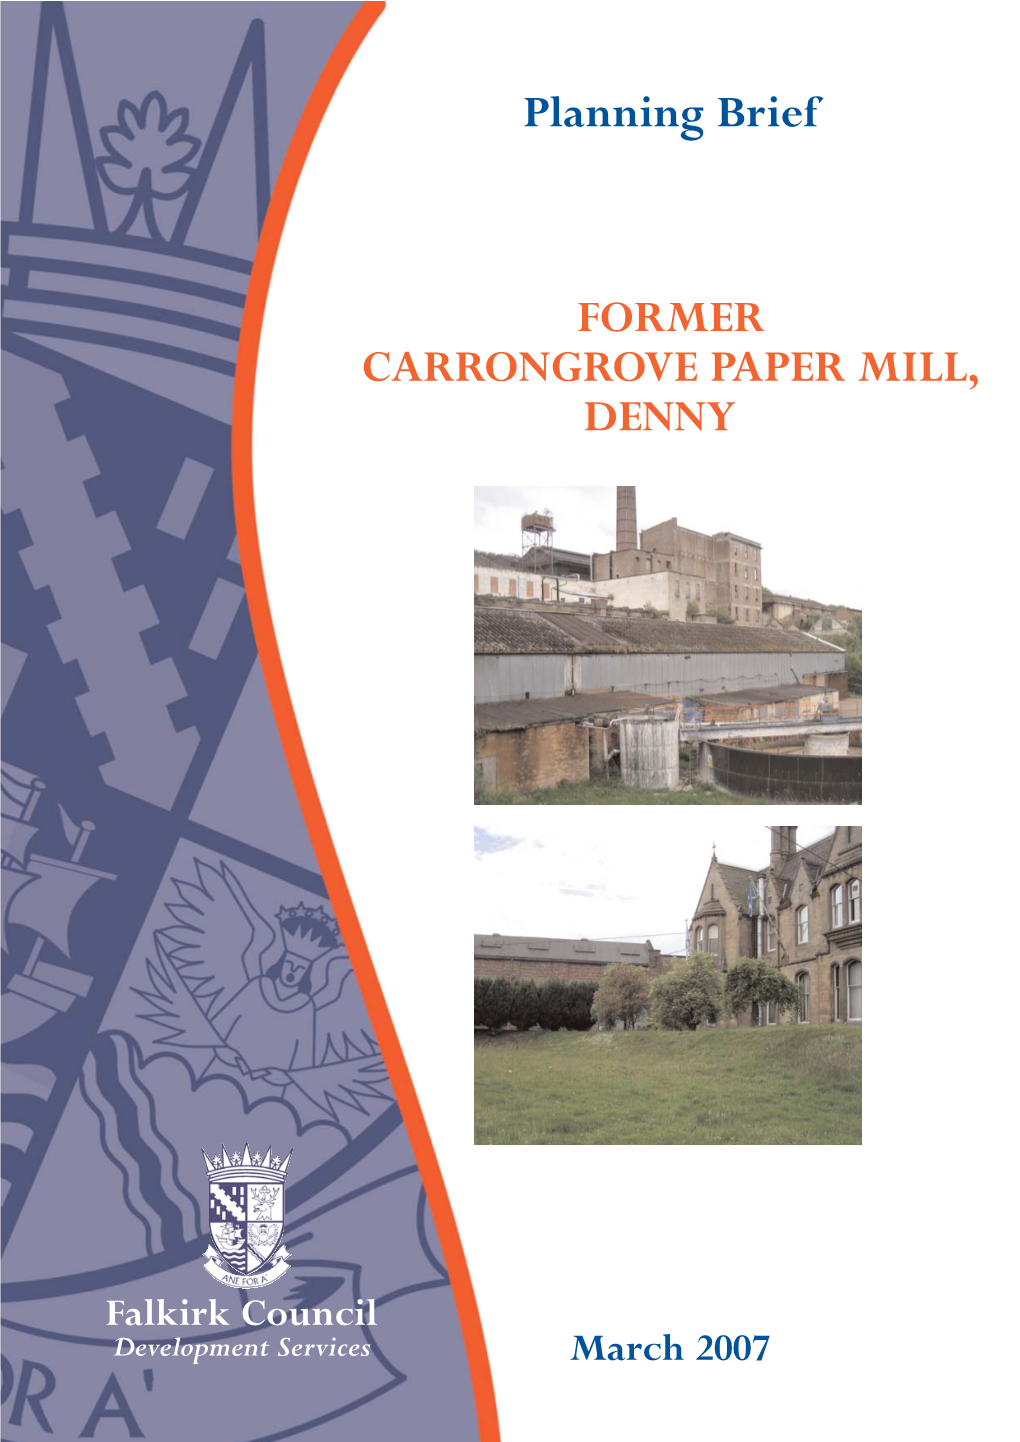 Planning Brief: Former Carrongrove Paper Mill, Denny